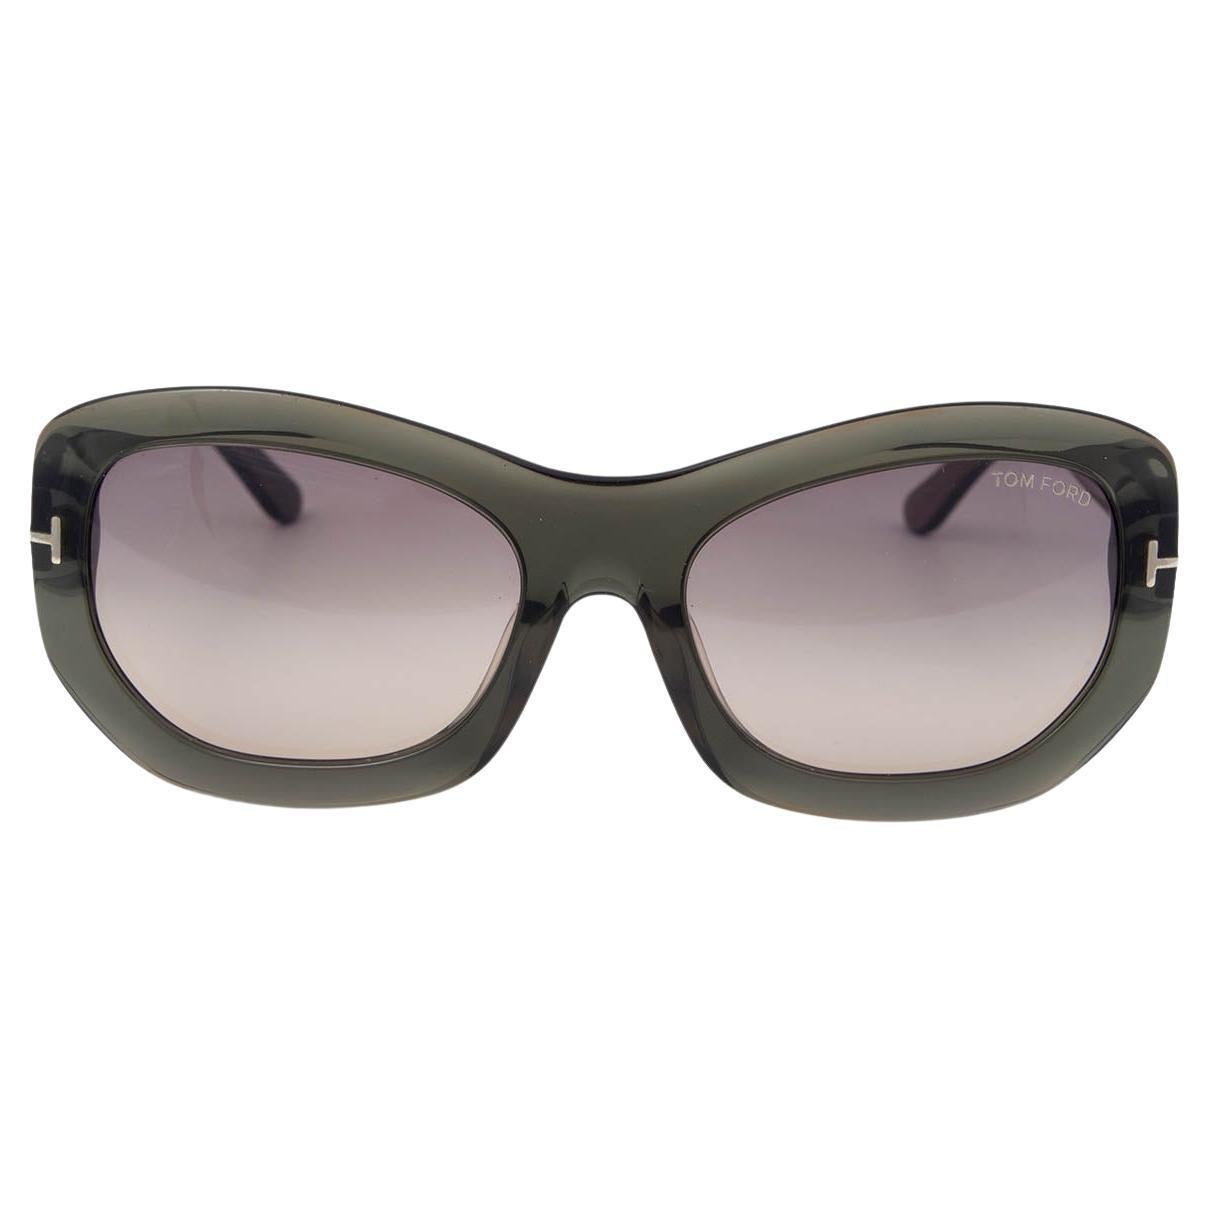 TOM FORD sage green AMY Oval Sunglasses TF382 For Sale